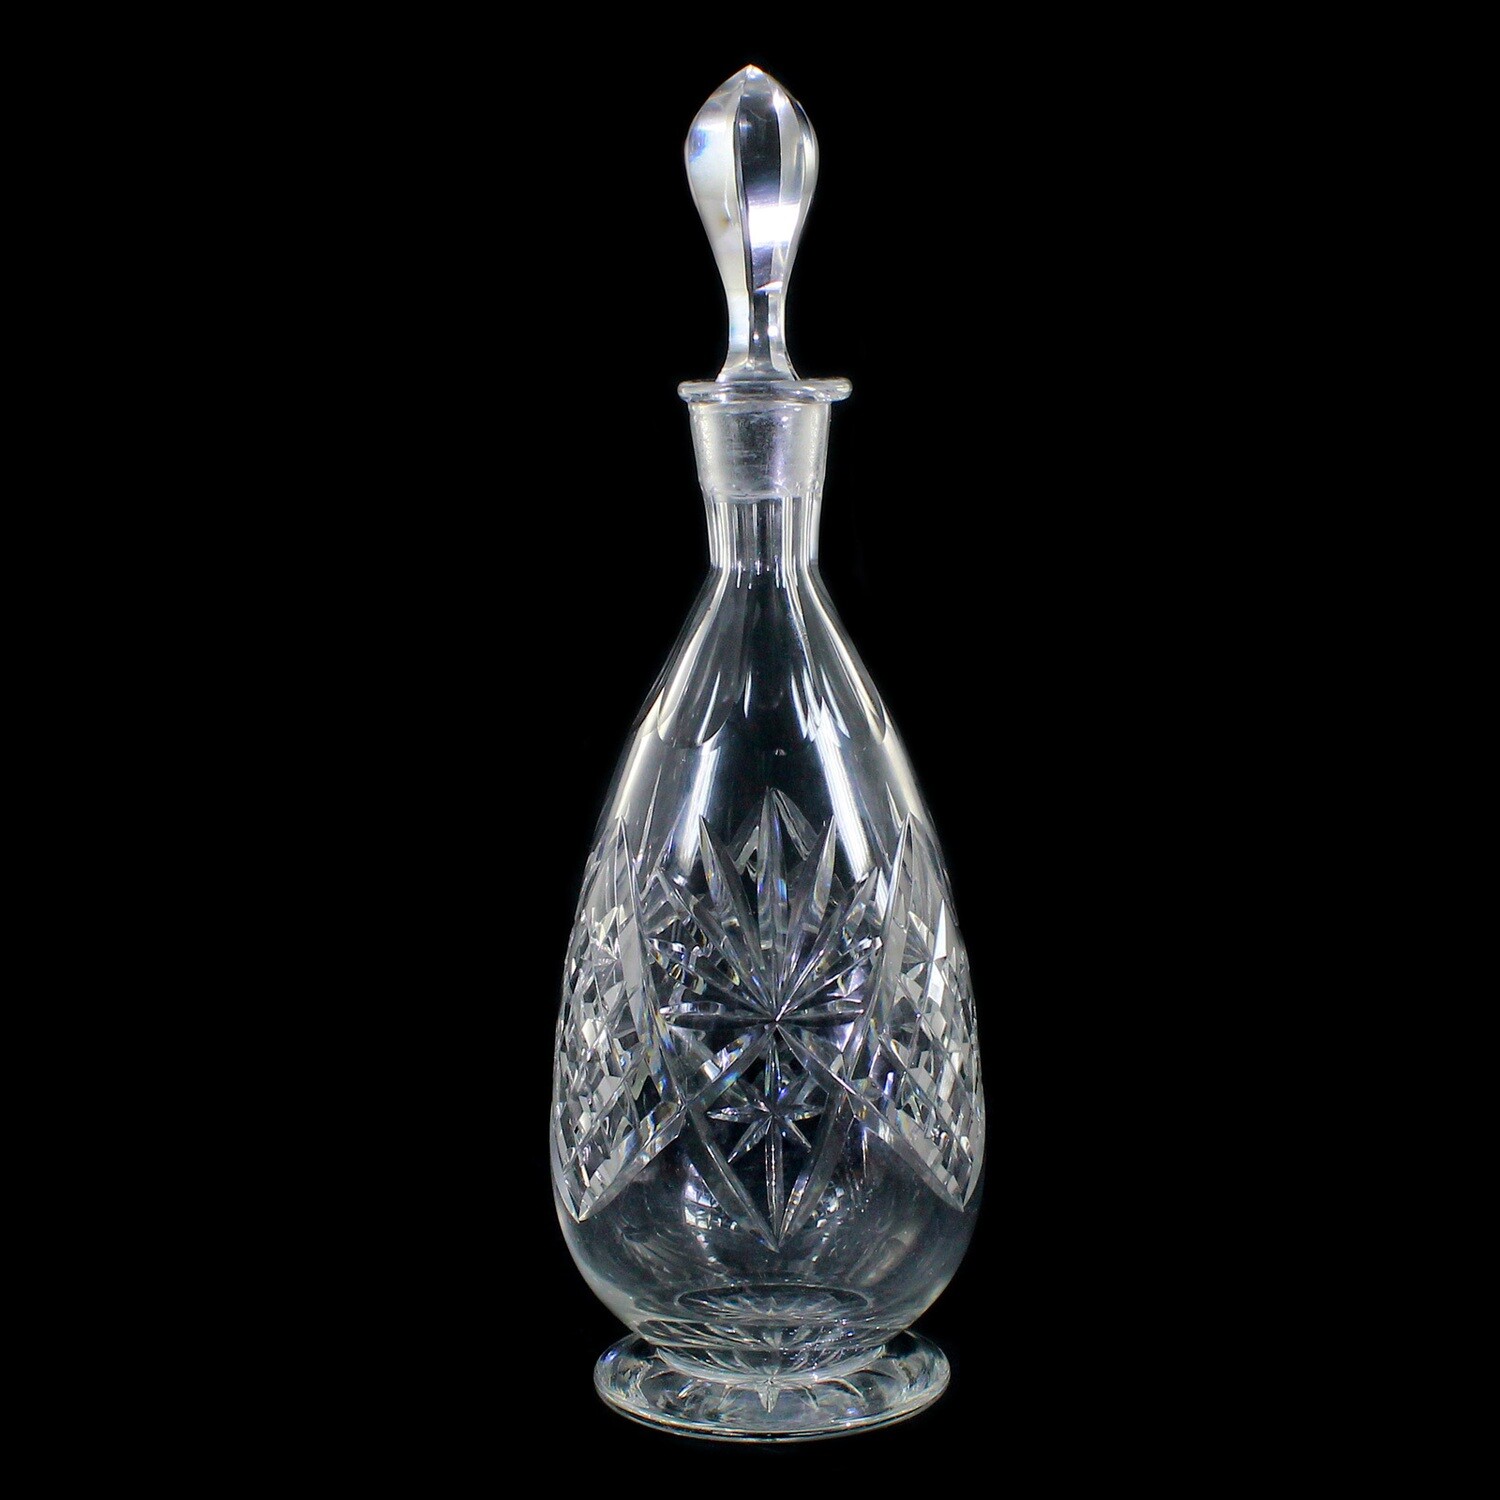 Carafe made of colorless crystal glass with decorative cut decoration, around 1920-30.